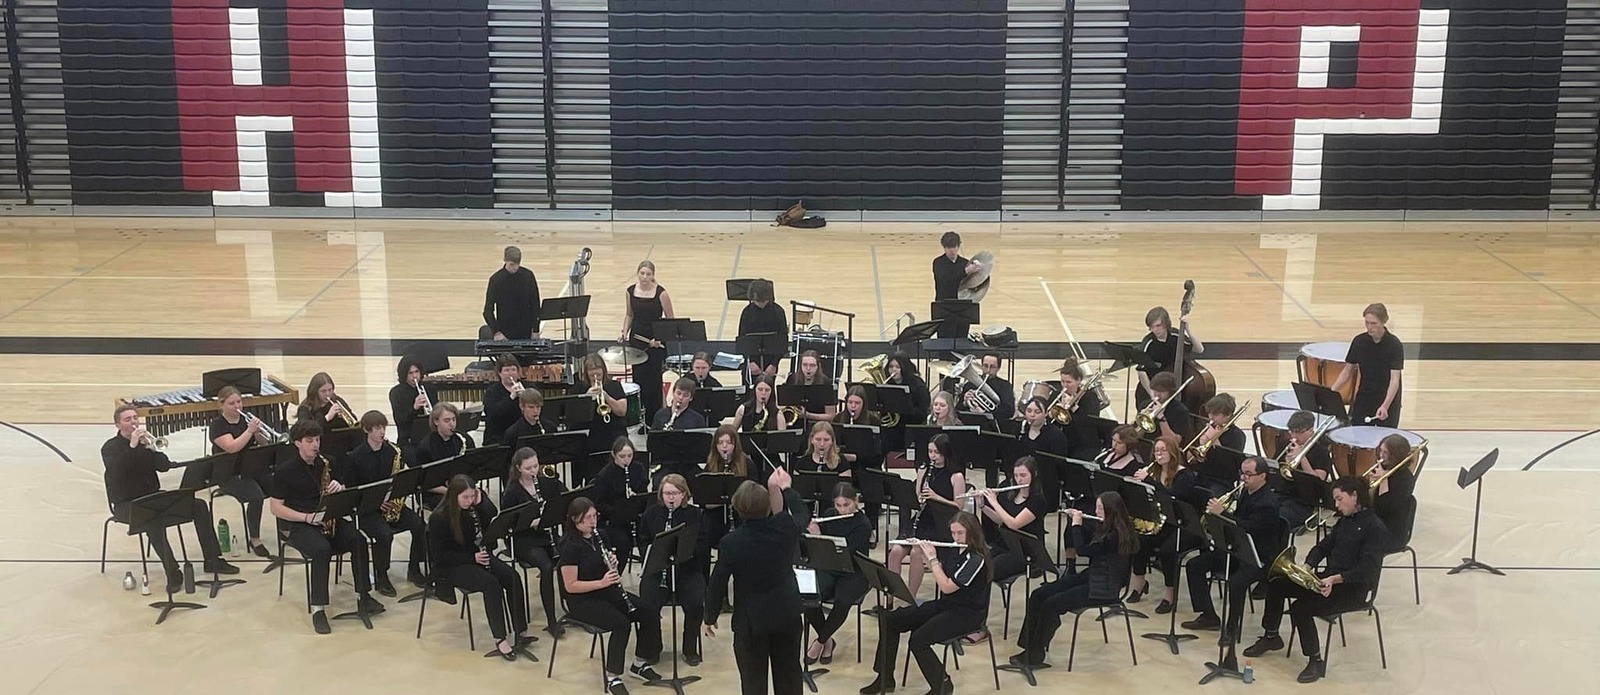 students in the band all together seated in a concert playing intruments